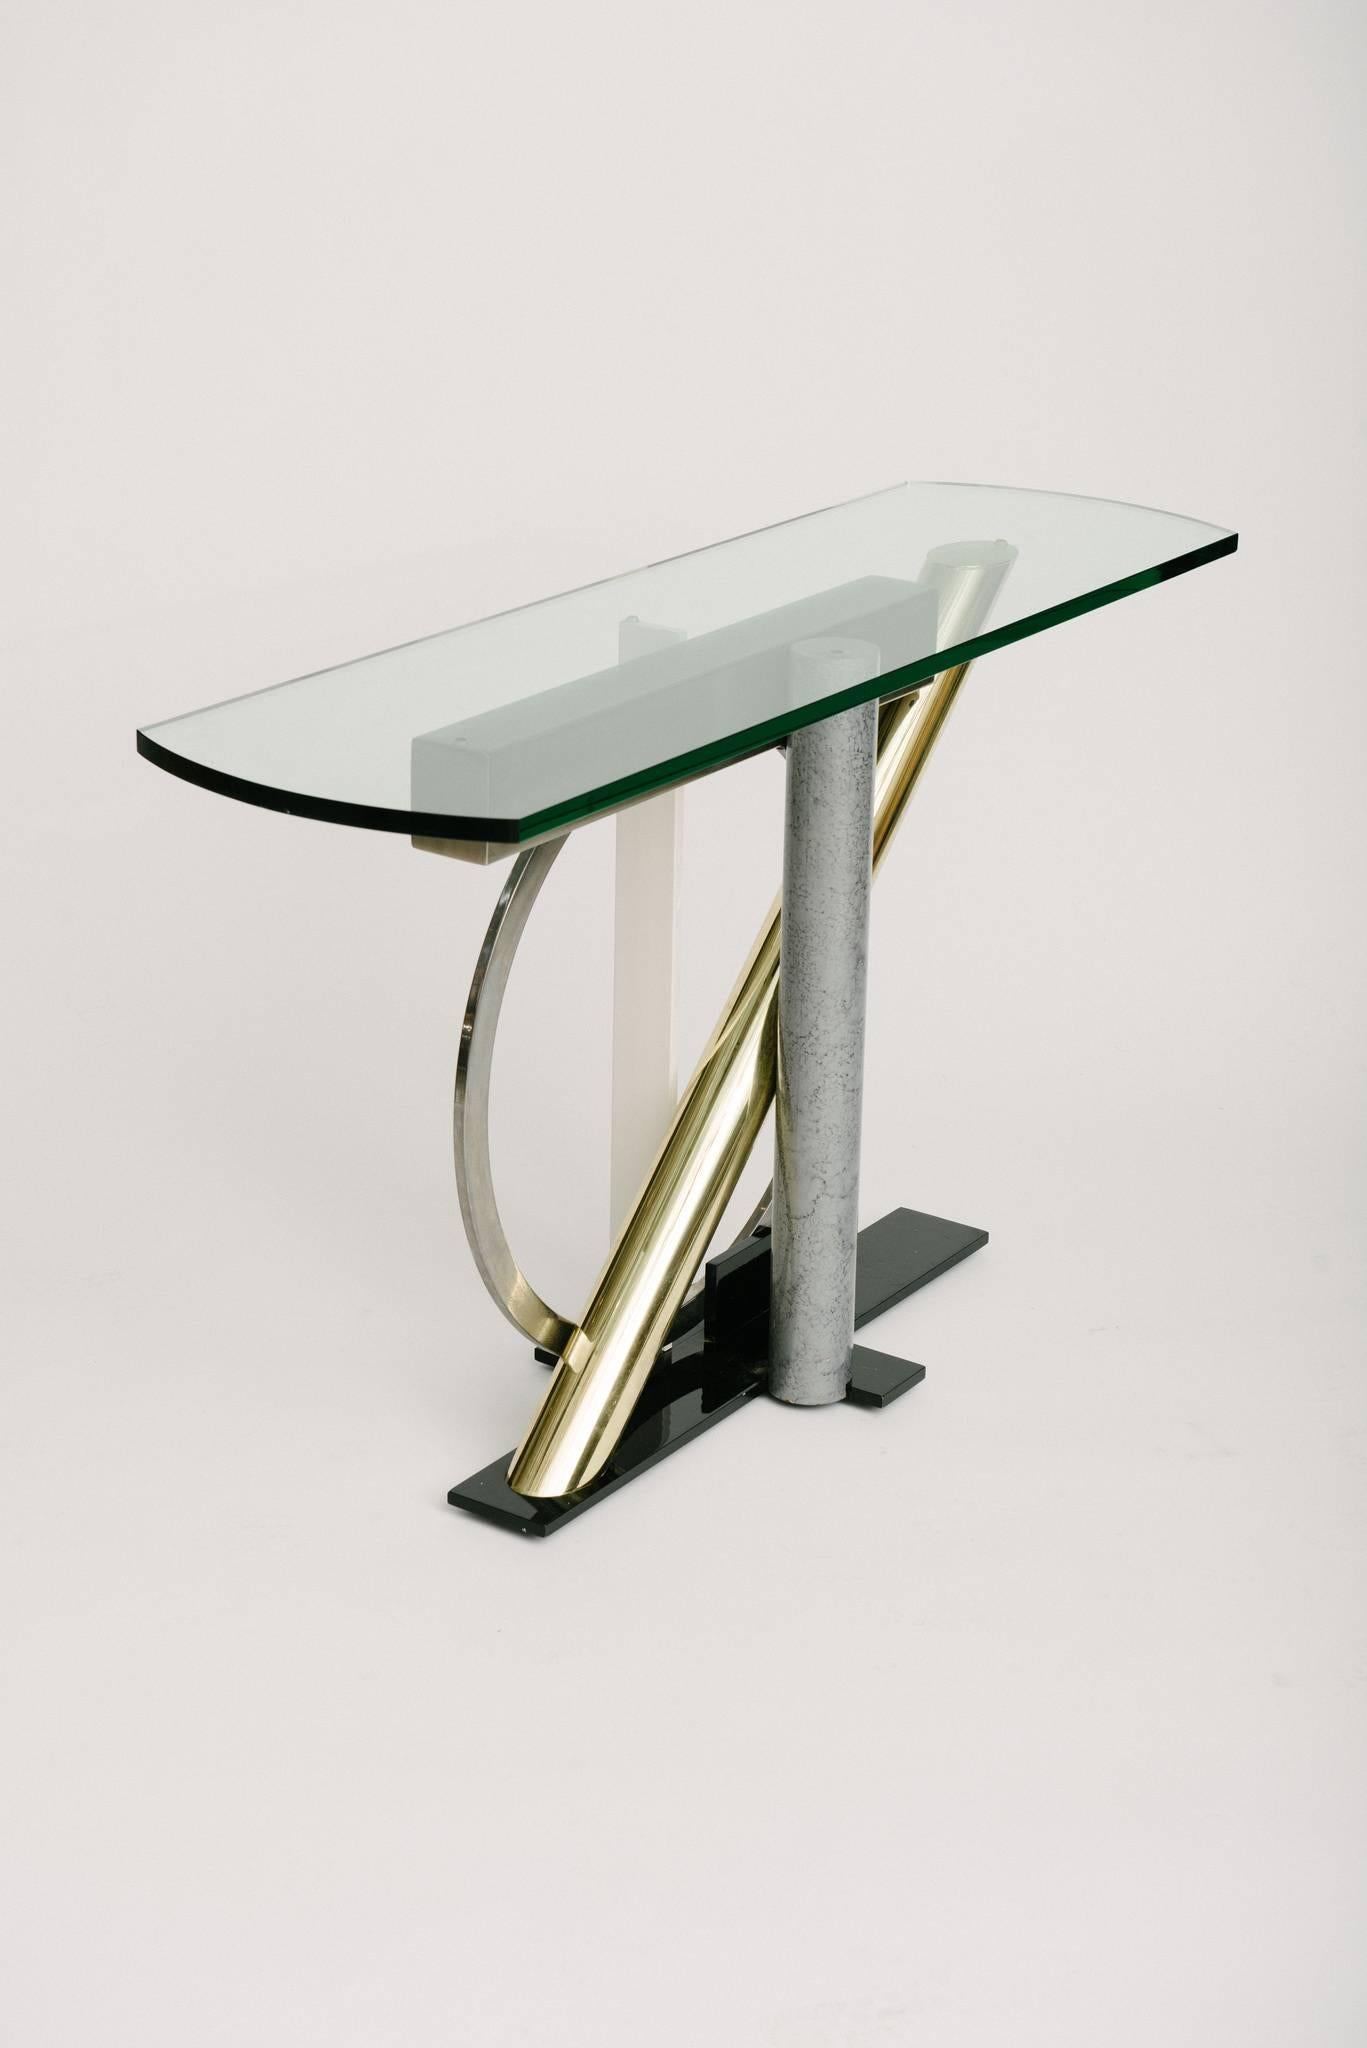 20th Century Vintage Geometric Console Table by Kaizo Oto For Sale